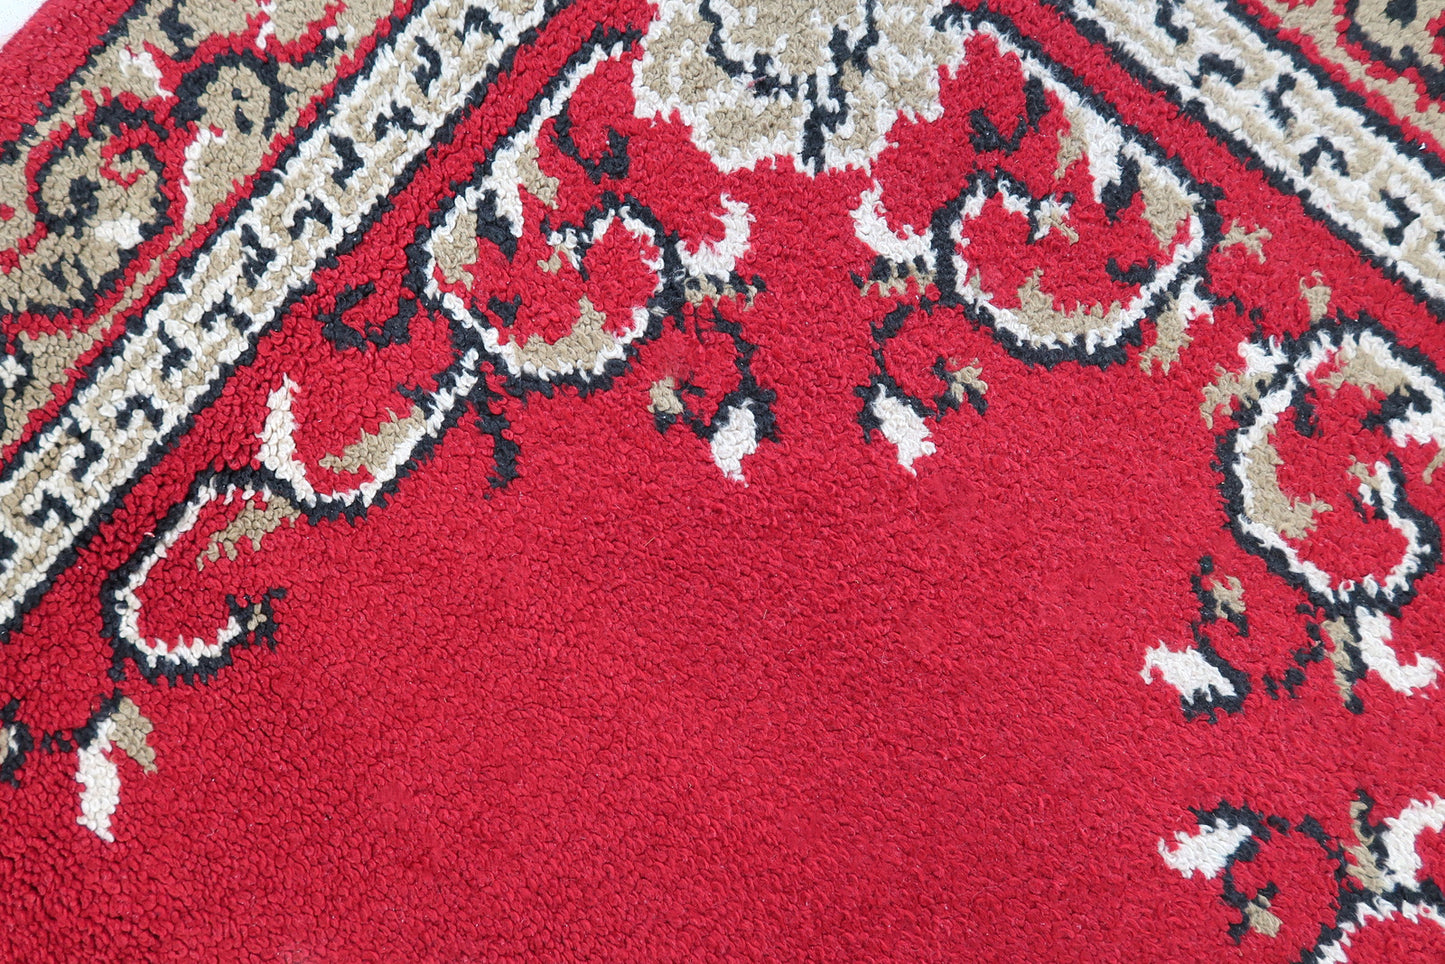 Vintage French Savonnerie woolen rug in bright red color and floral design. The rug is from the end of 20th century in original good condition.